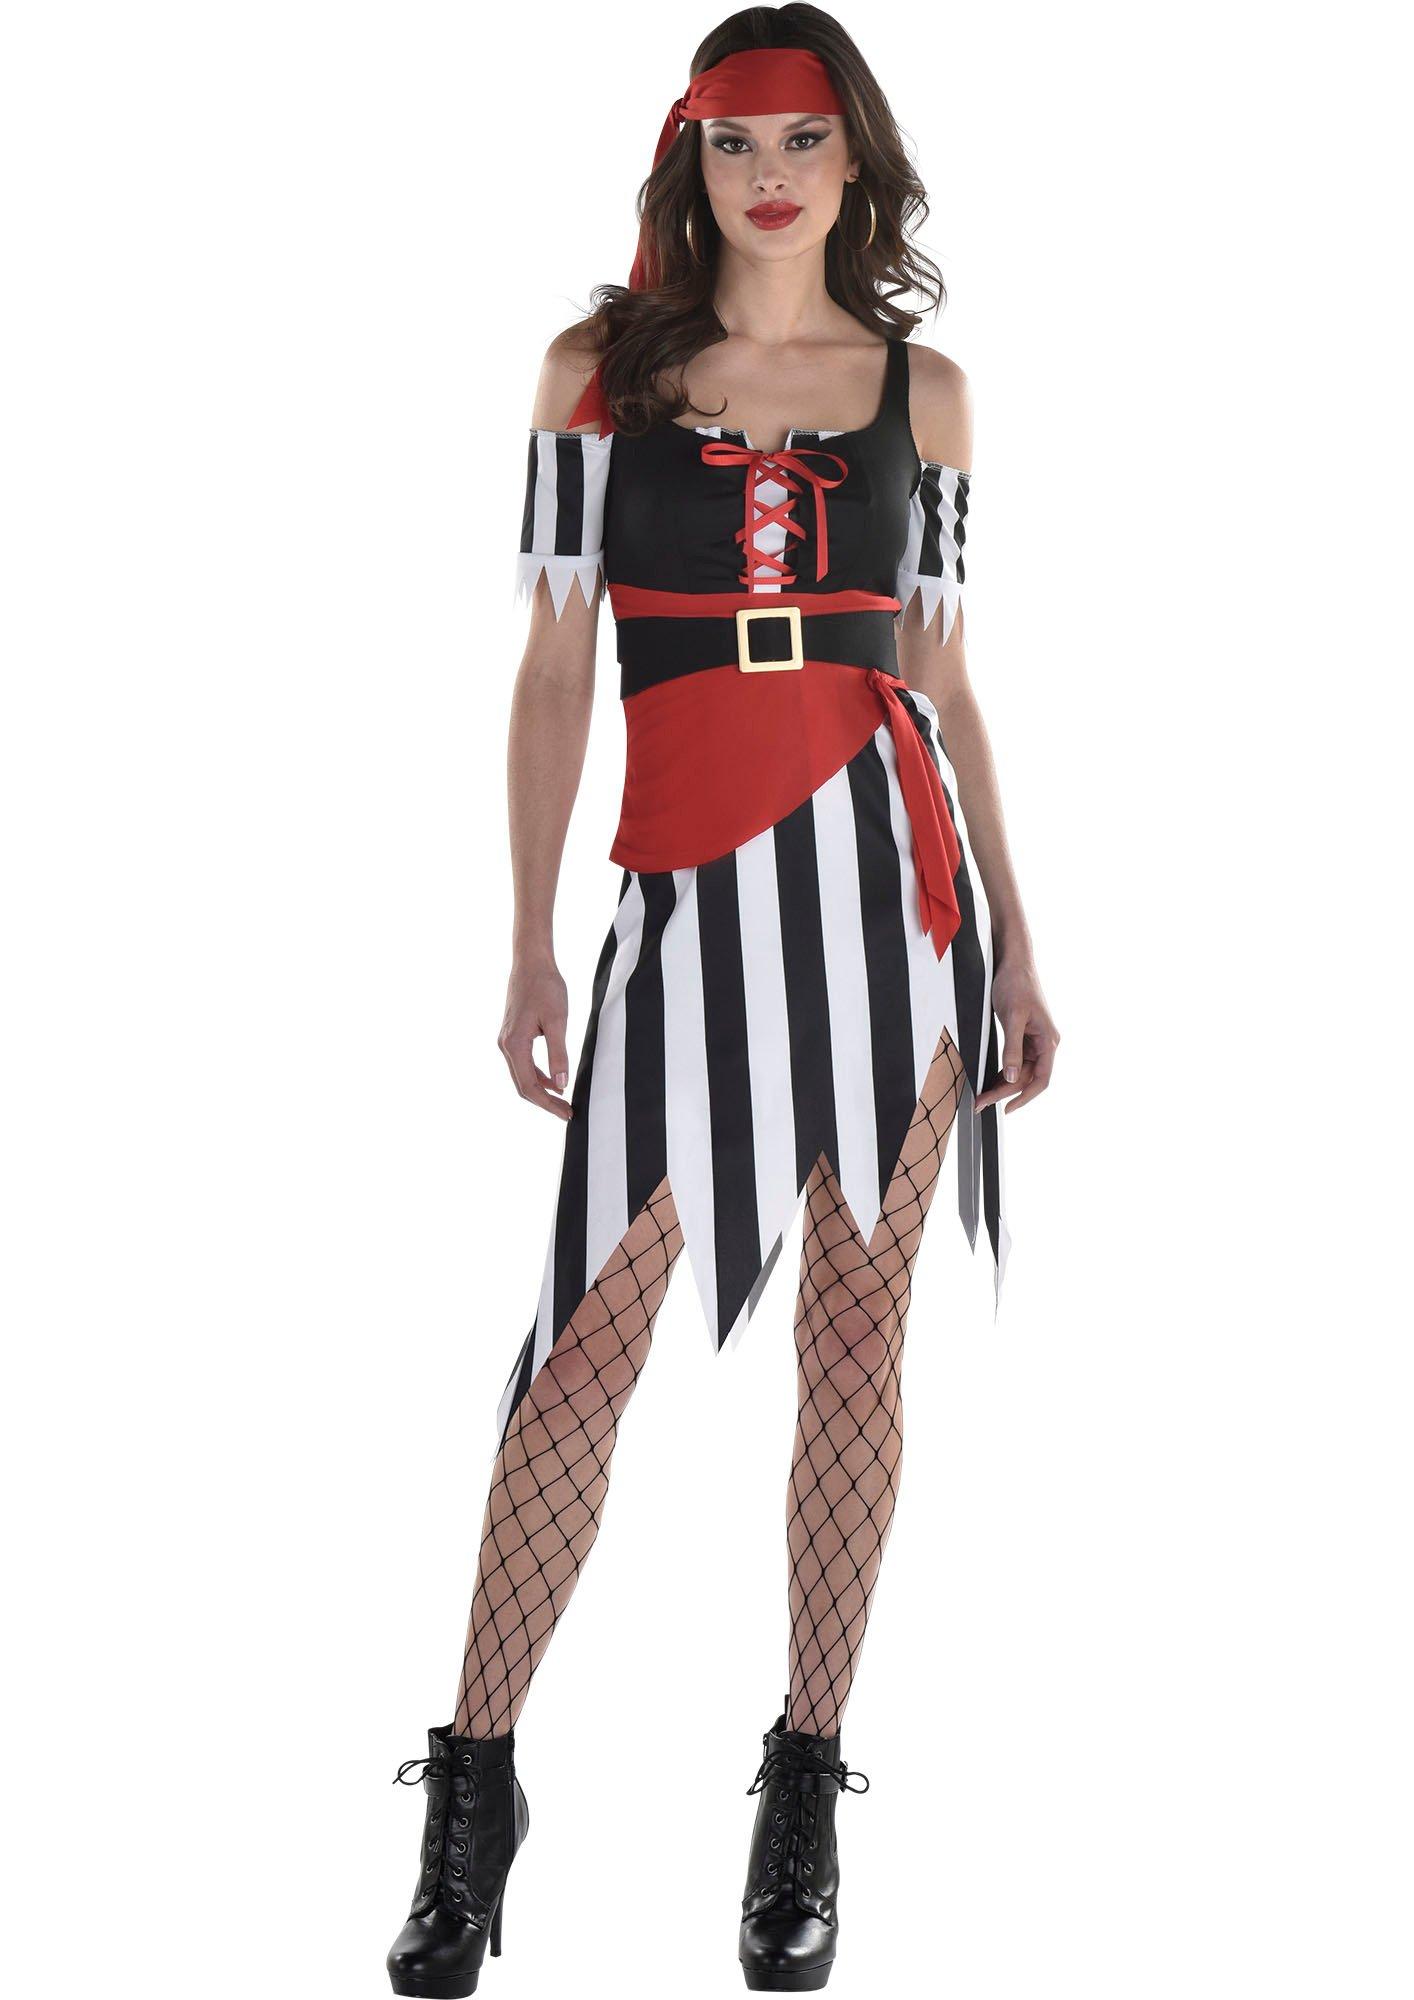 Adult Sultry Shipmate Costume